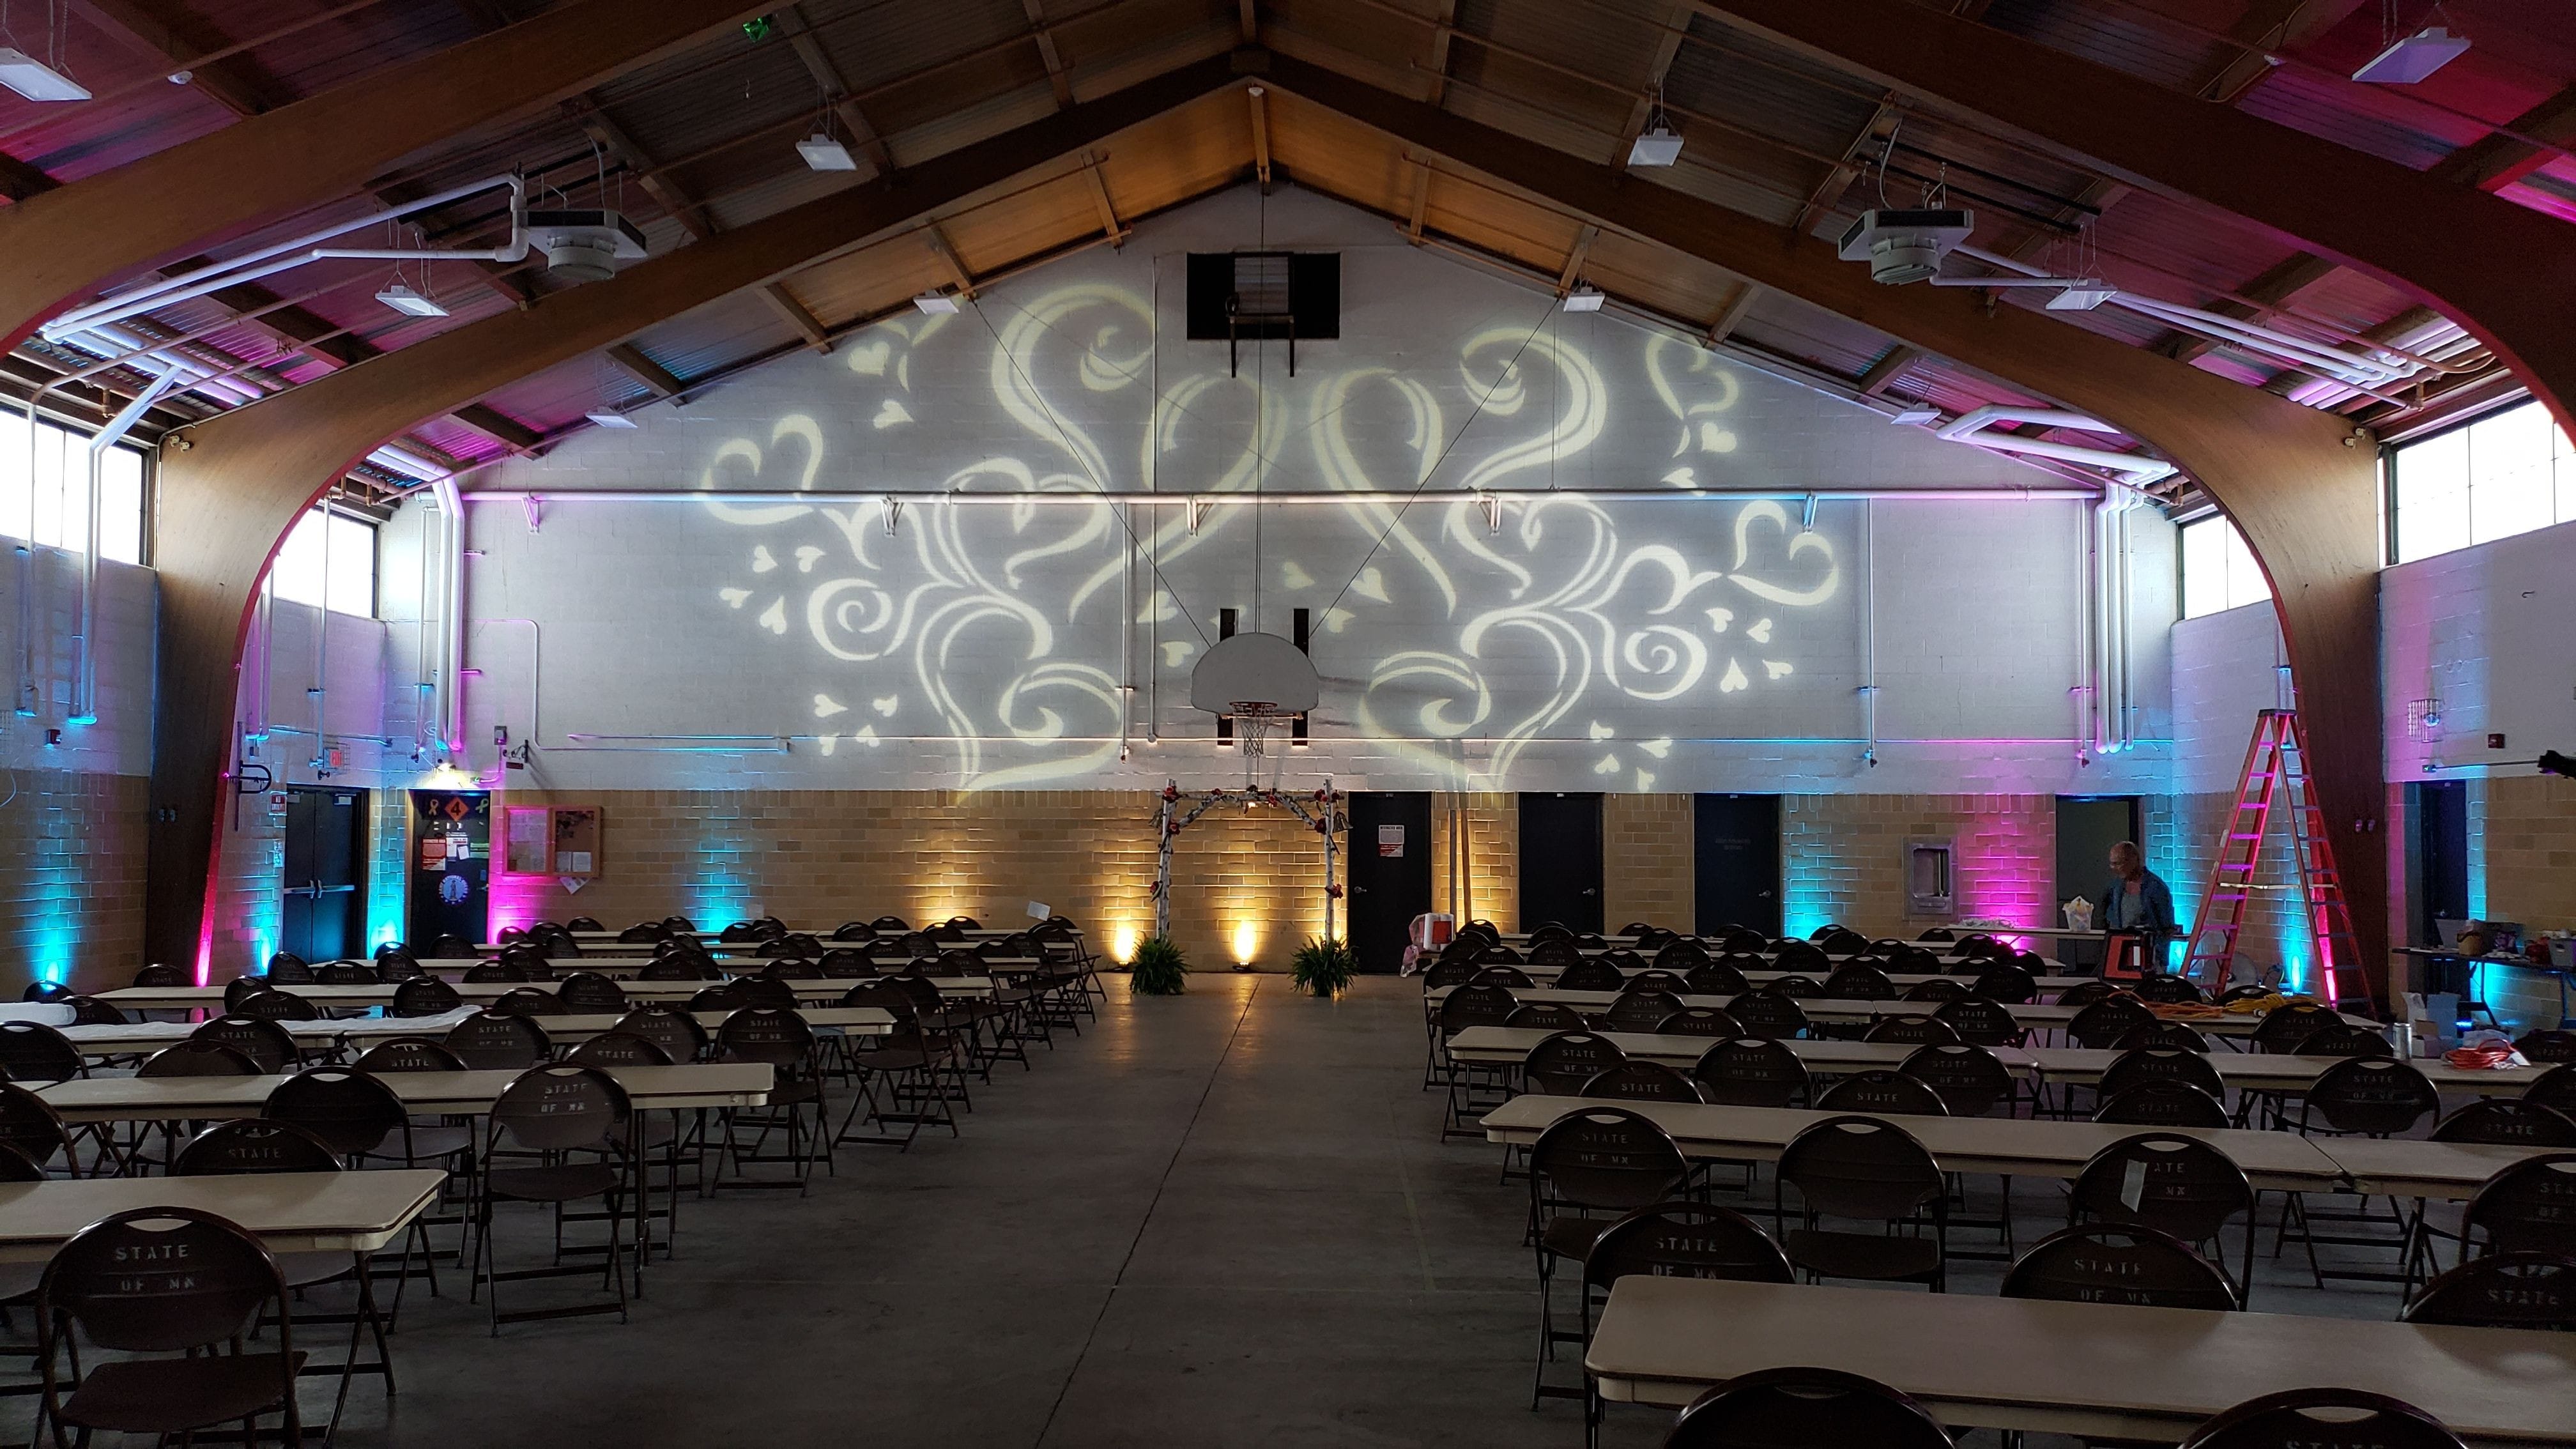 Wedding lighting at the Cloquet Armory by Duluth Event Lighting. Up lighting in blue, teal and magenta with fun heart gobos on the walls.